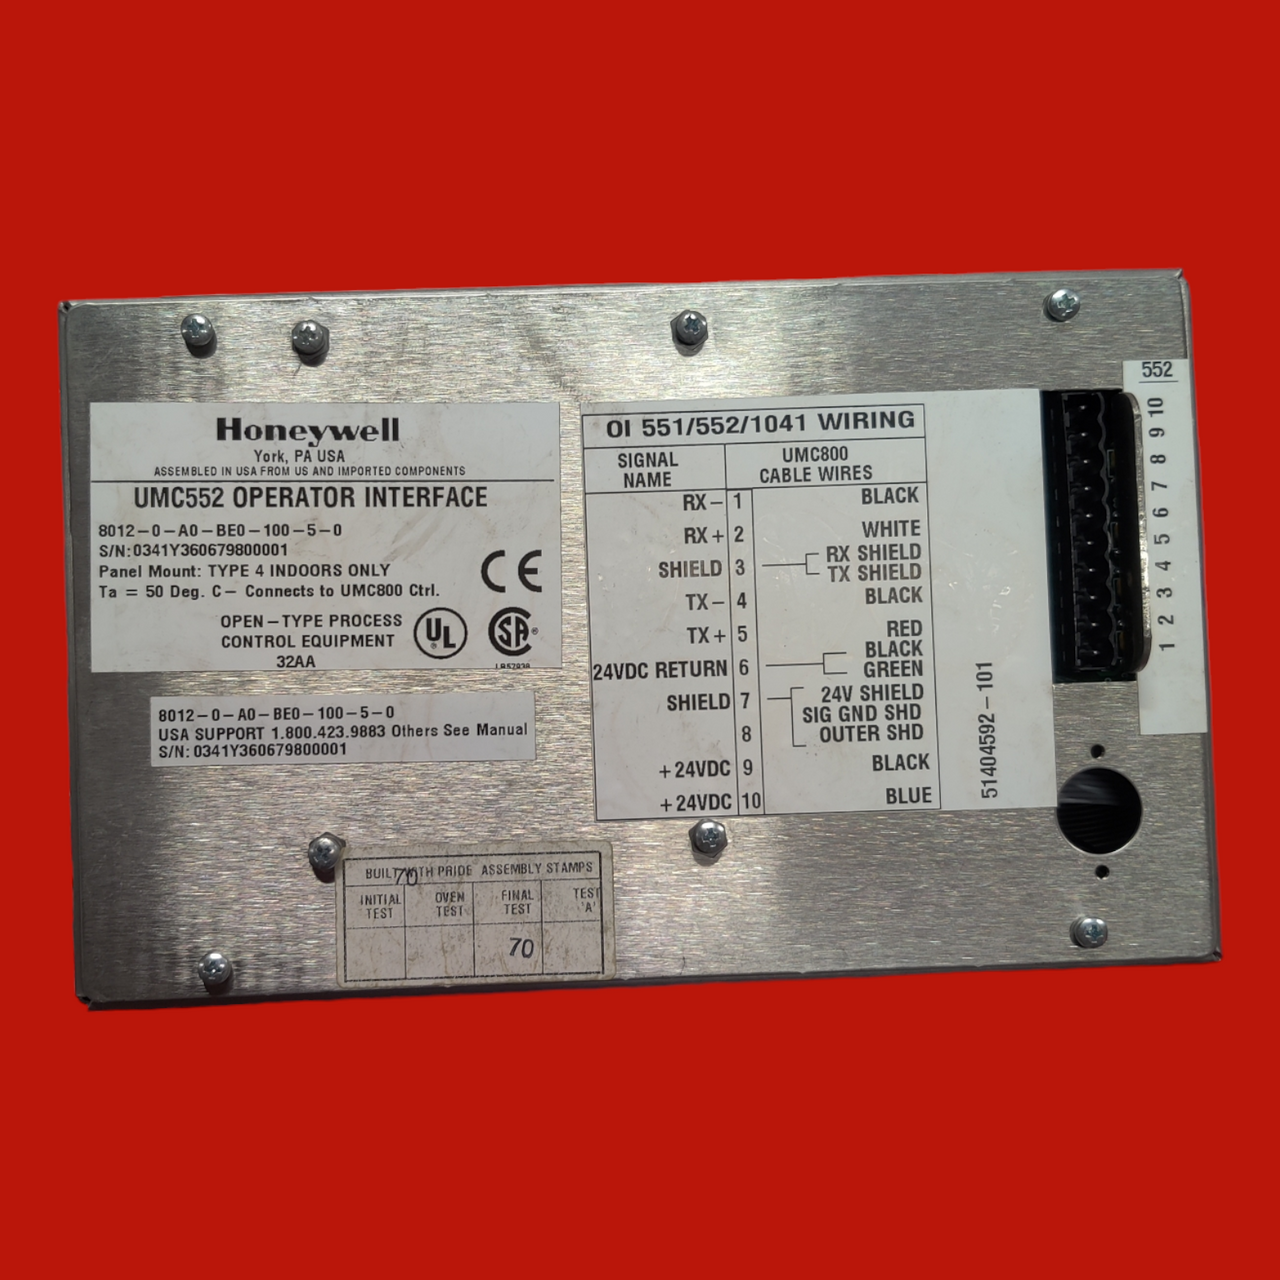 Honeywell UMC552 Operator Interface, 8012-0-A0-BE0-100-5-0, Has Not Been Tested